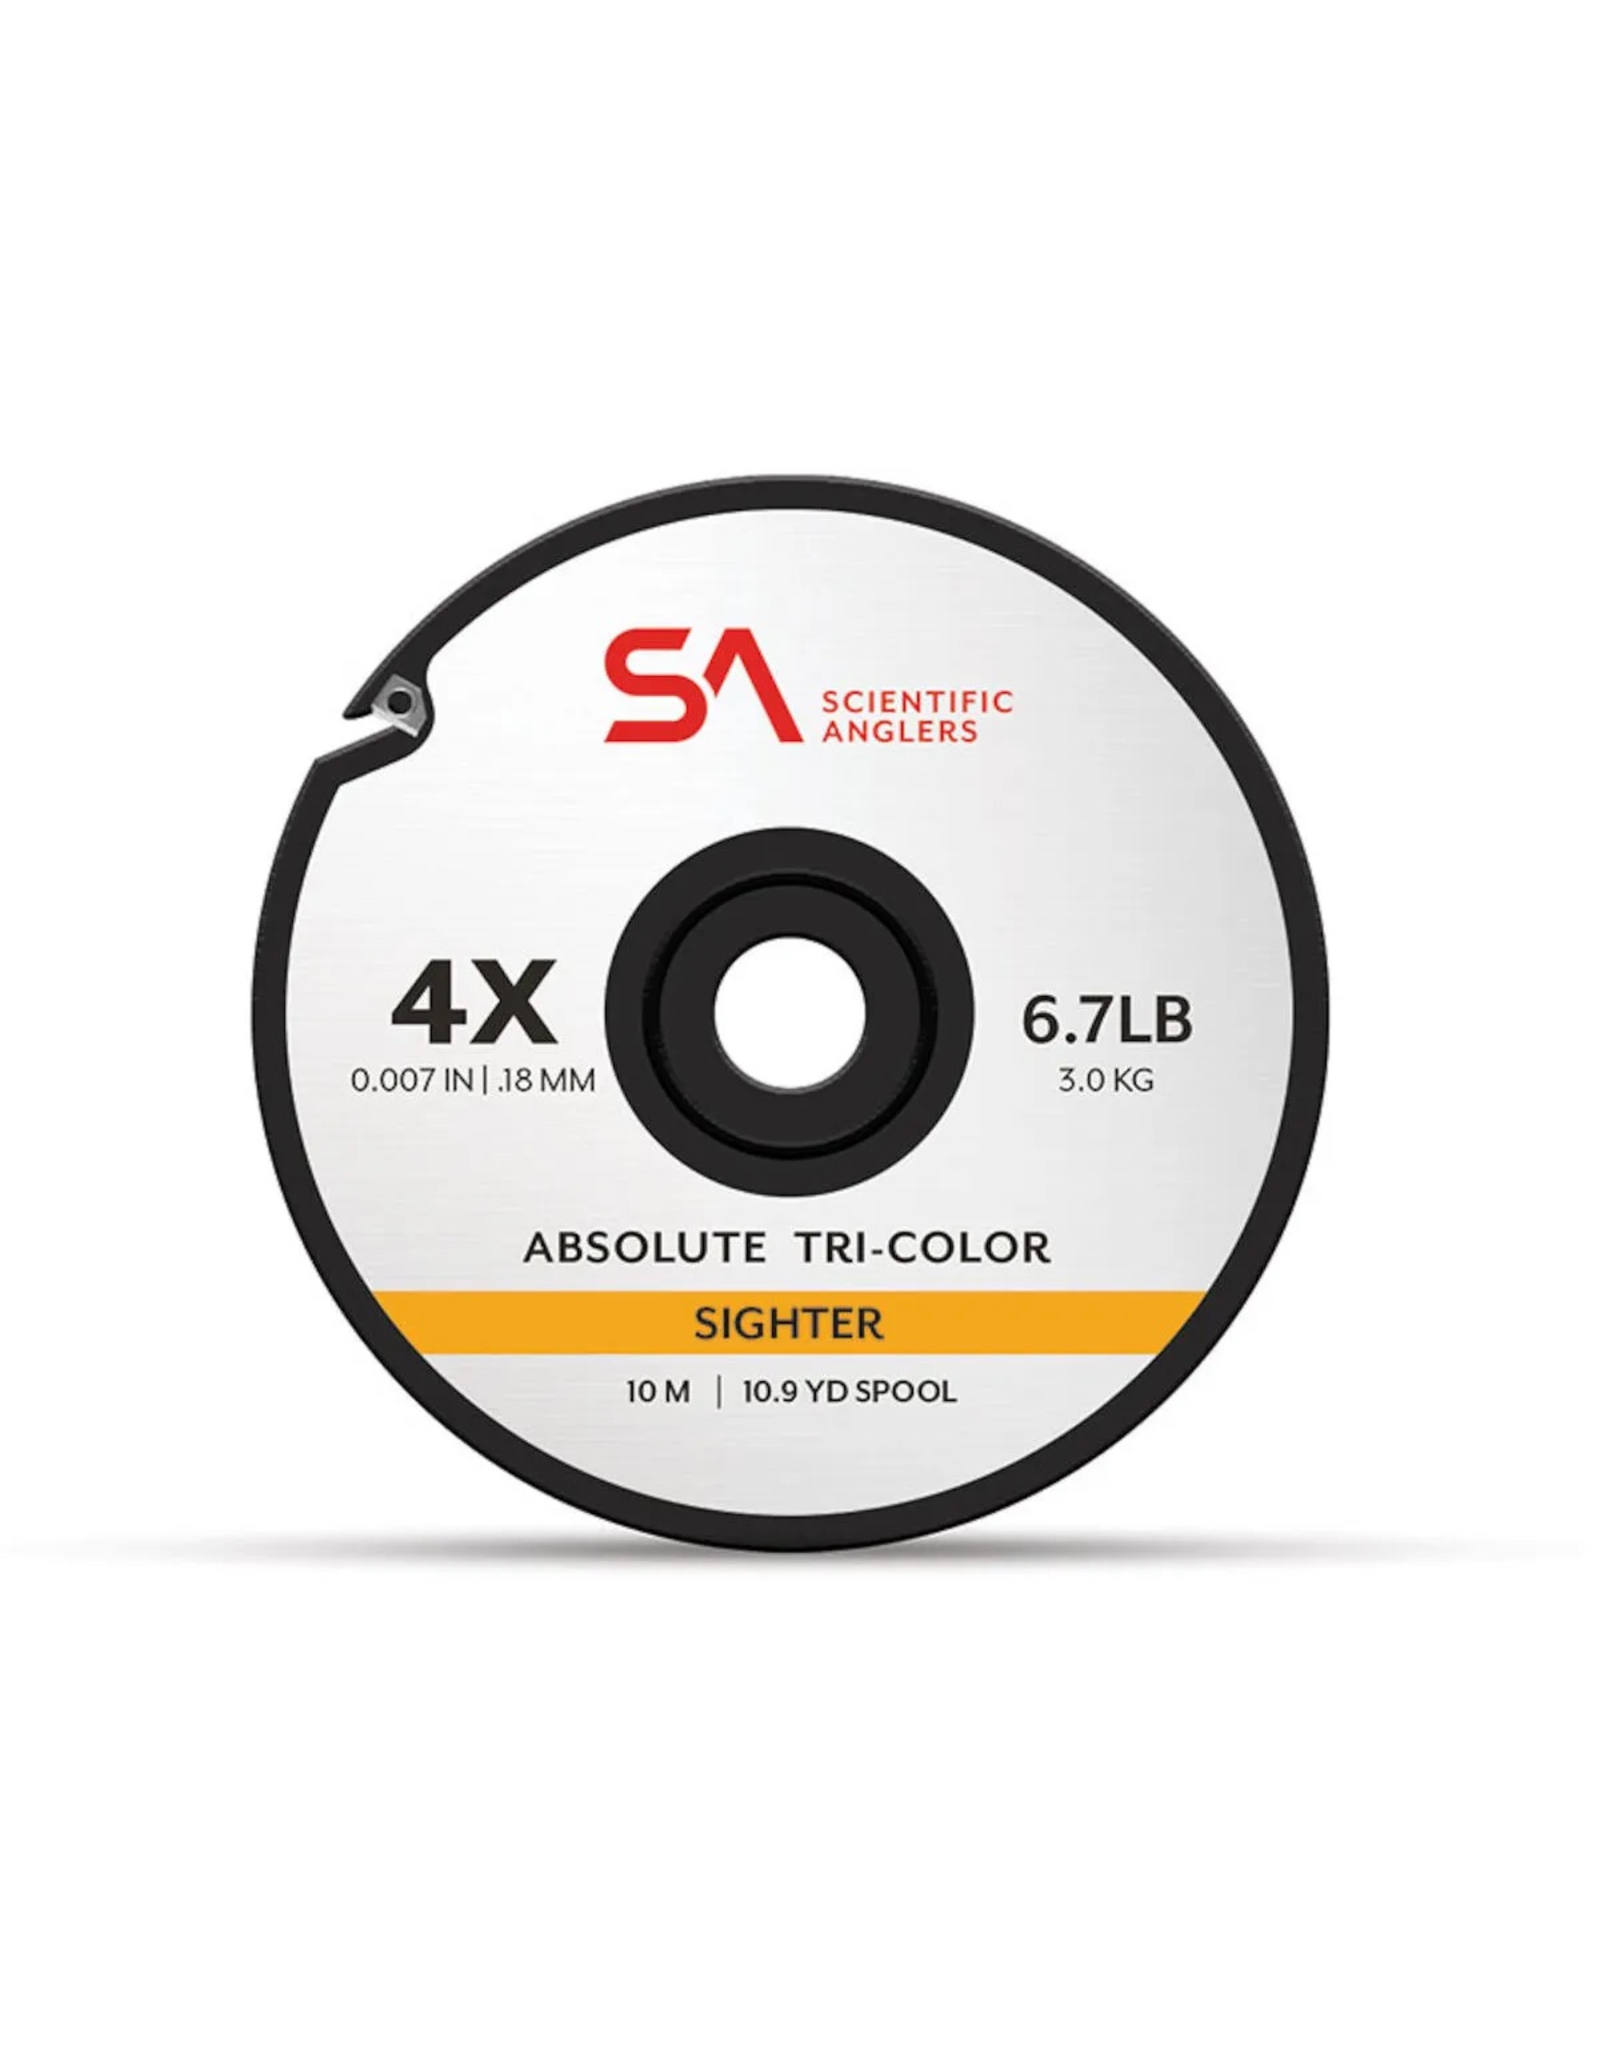 SCIENTIFIC ANGLERS Absolute Tri-Color Sighter Tippet 4X 10M